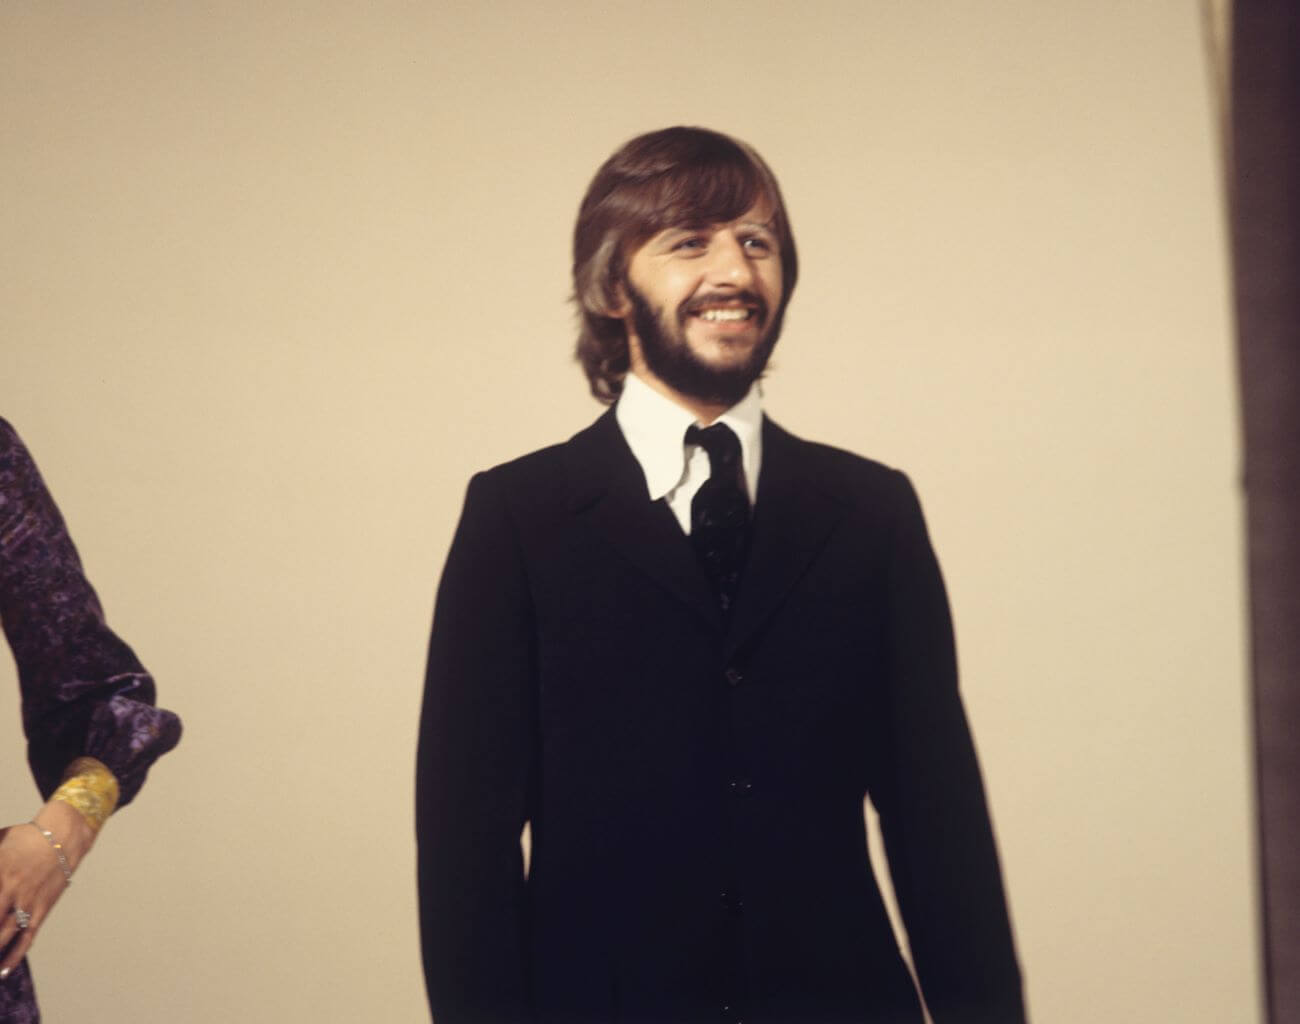 Ringo Starr wears a suit and stands in front of a tan background. 